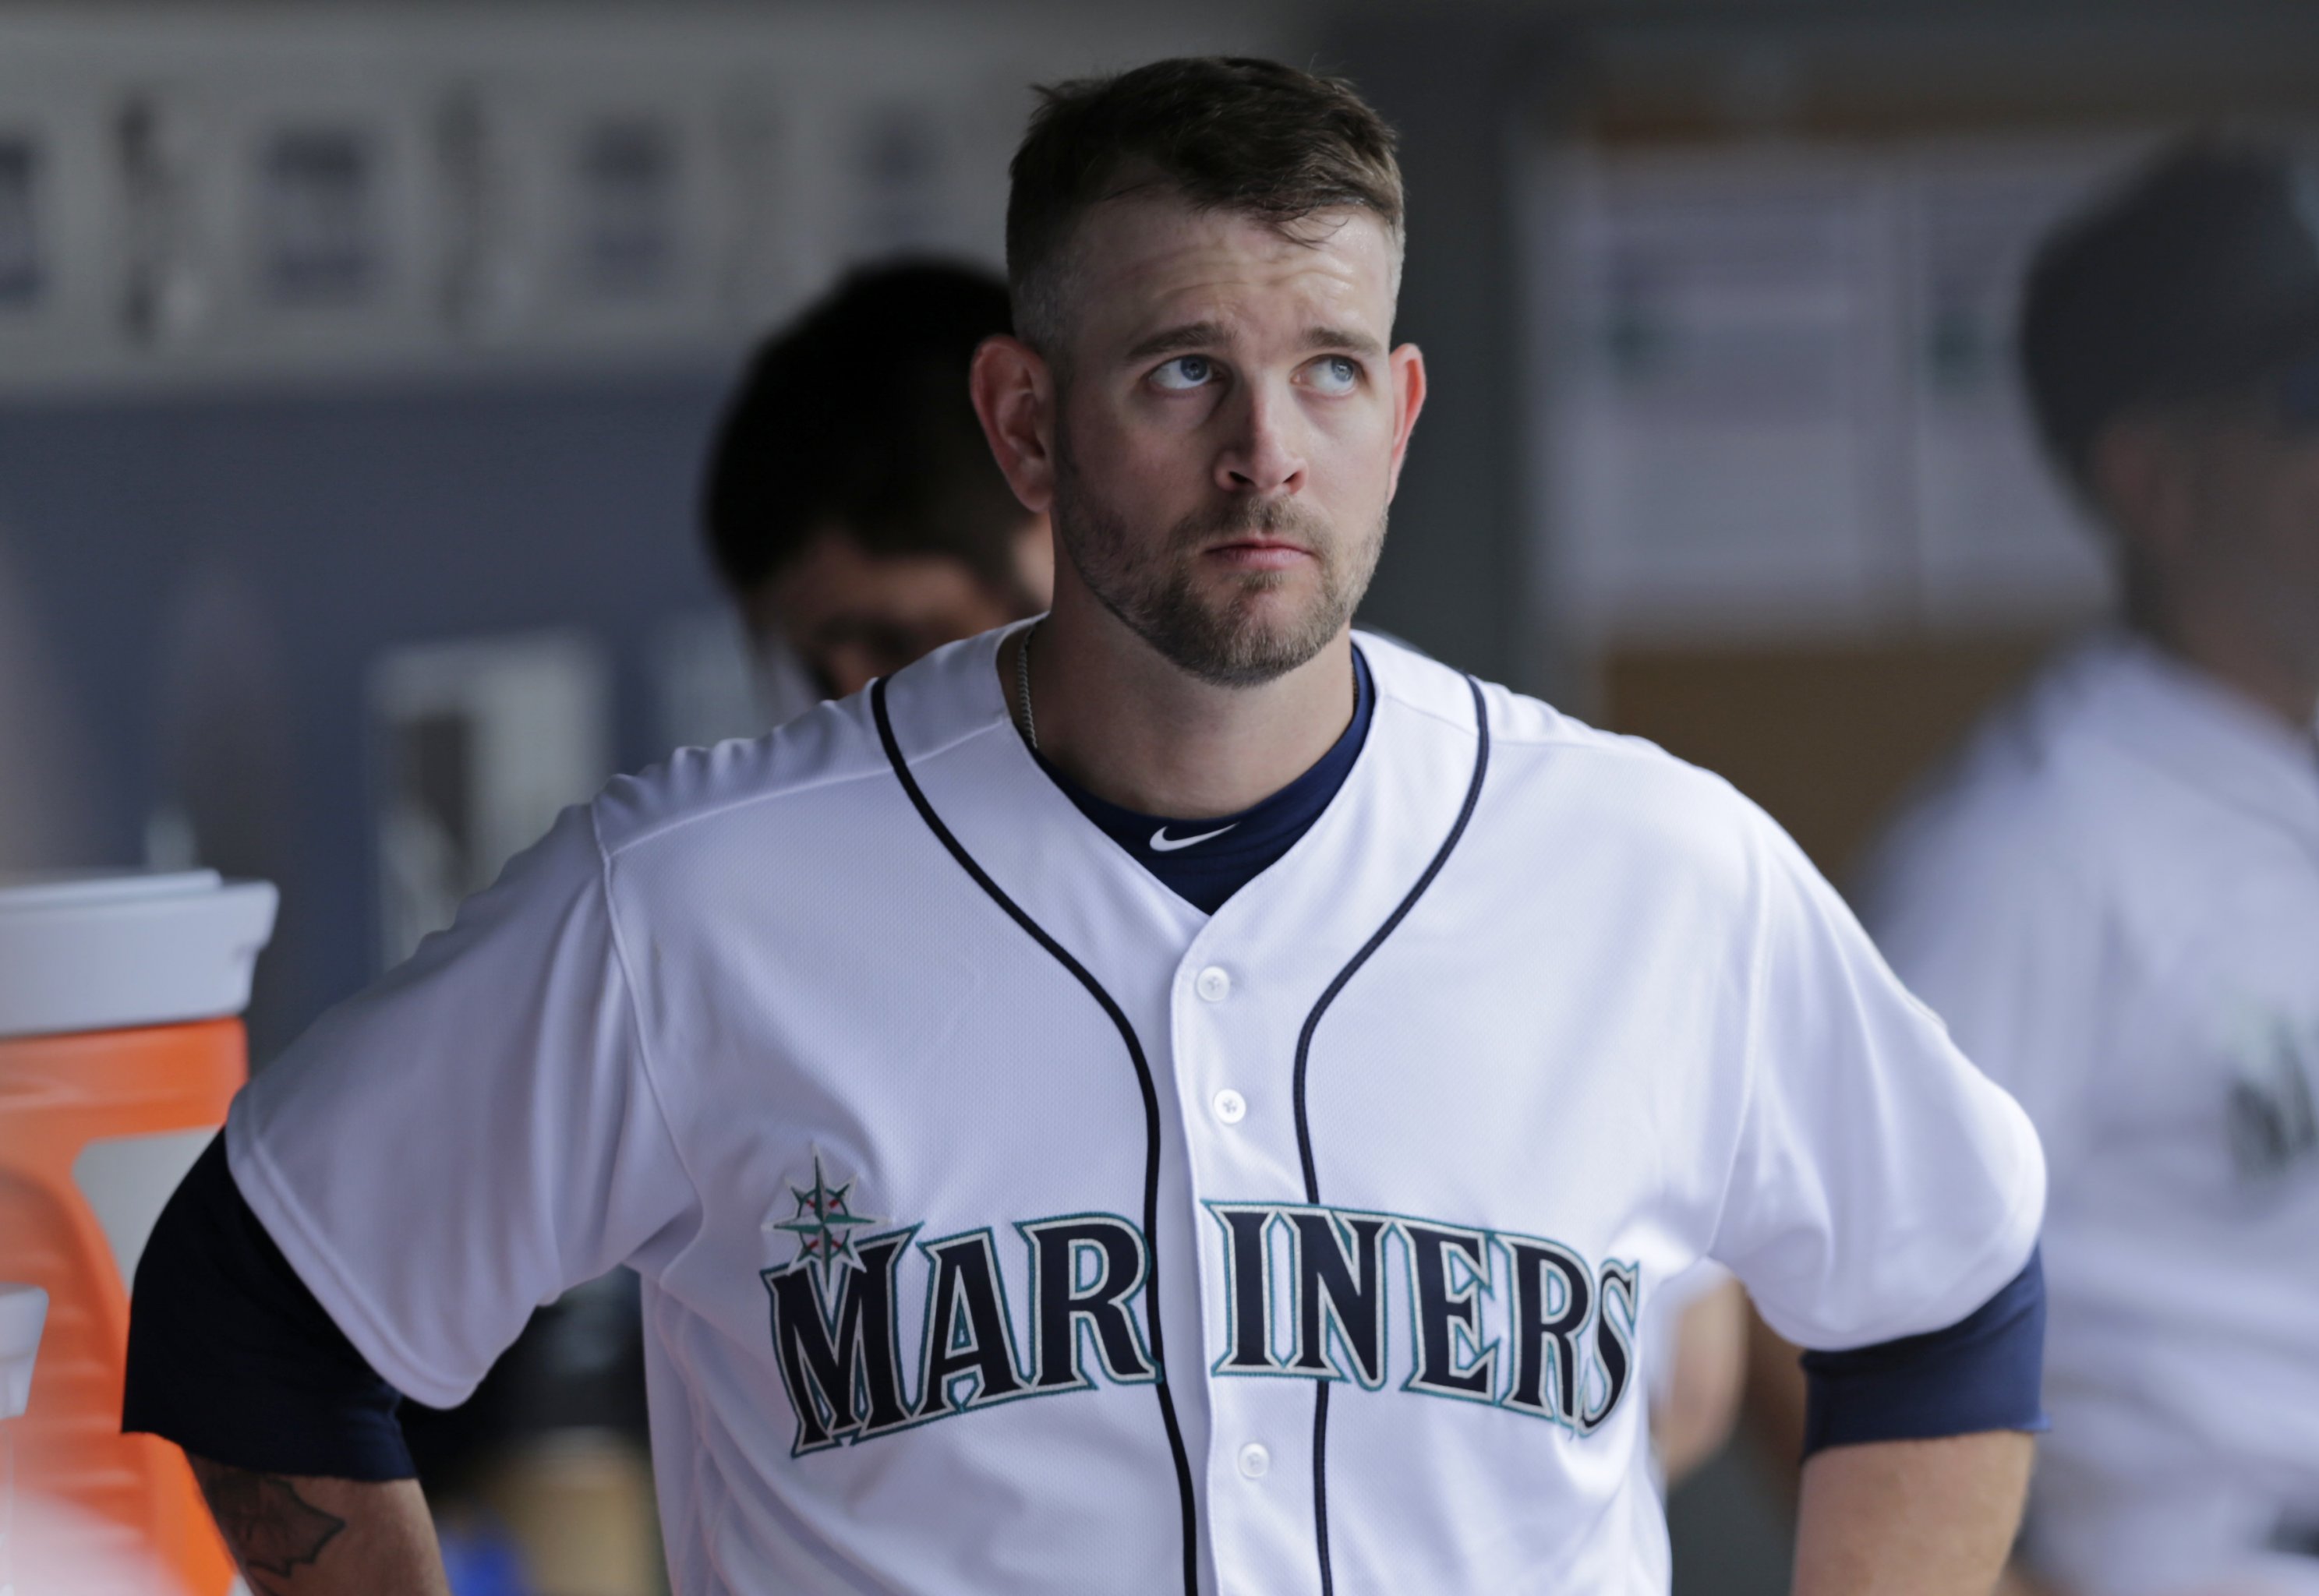 Mariners finalize trade sending catcher Mike Zunino, outfielder Guillermo  Heredia to the Rays